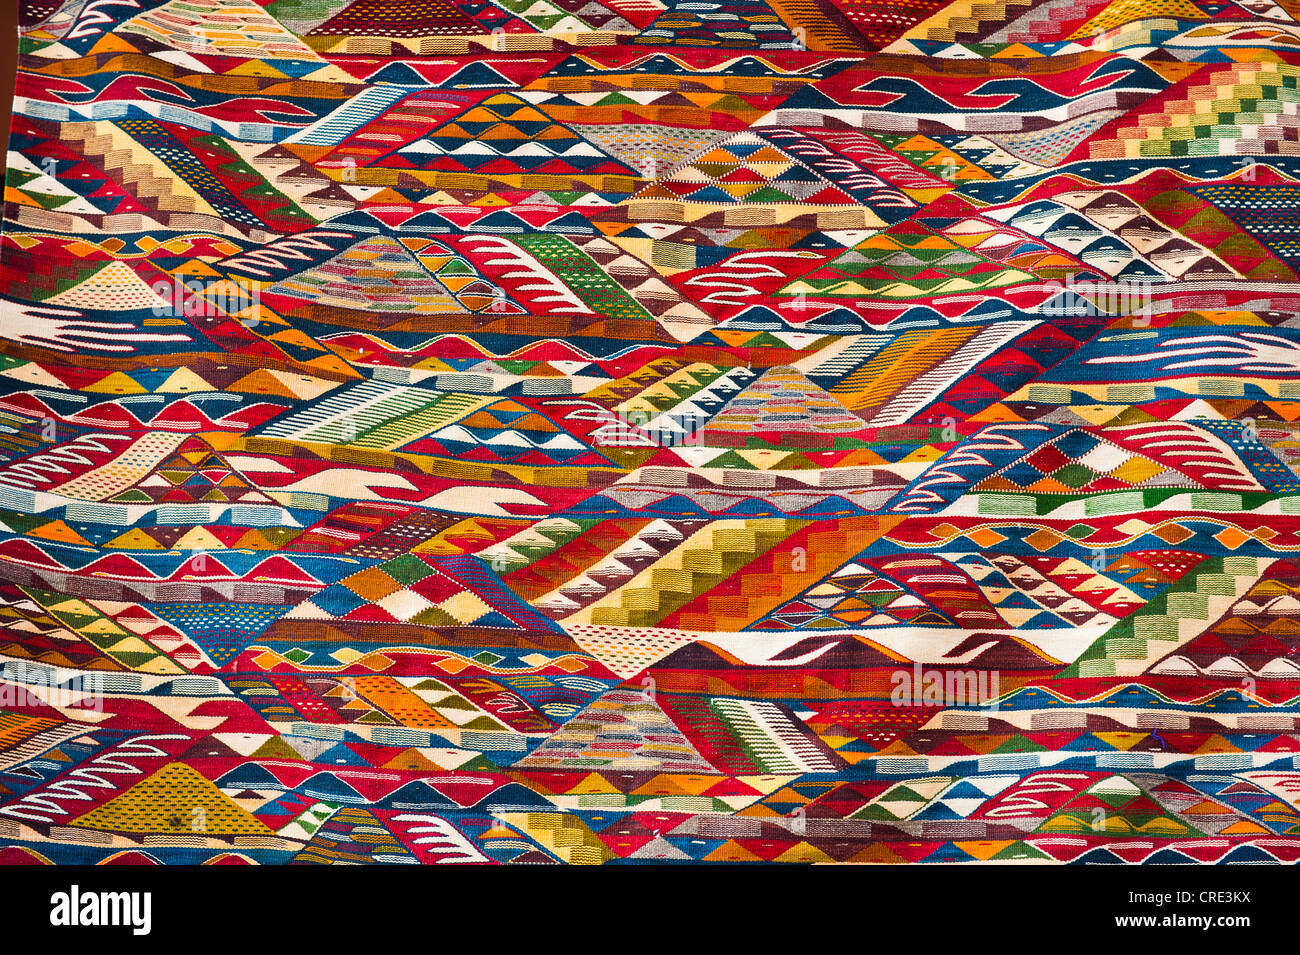 Multi-coloured pattern of a woven carpet, Marrakech, Morocco, Africa Stock Photo